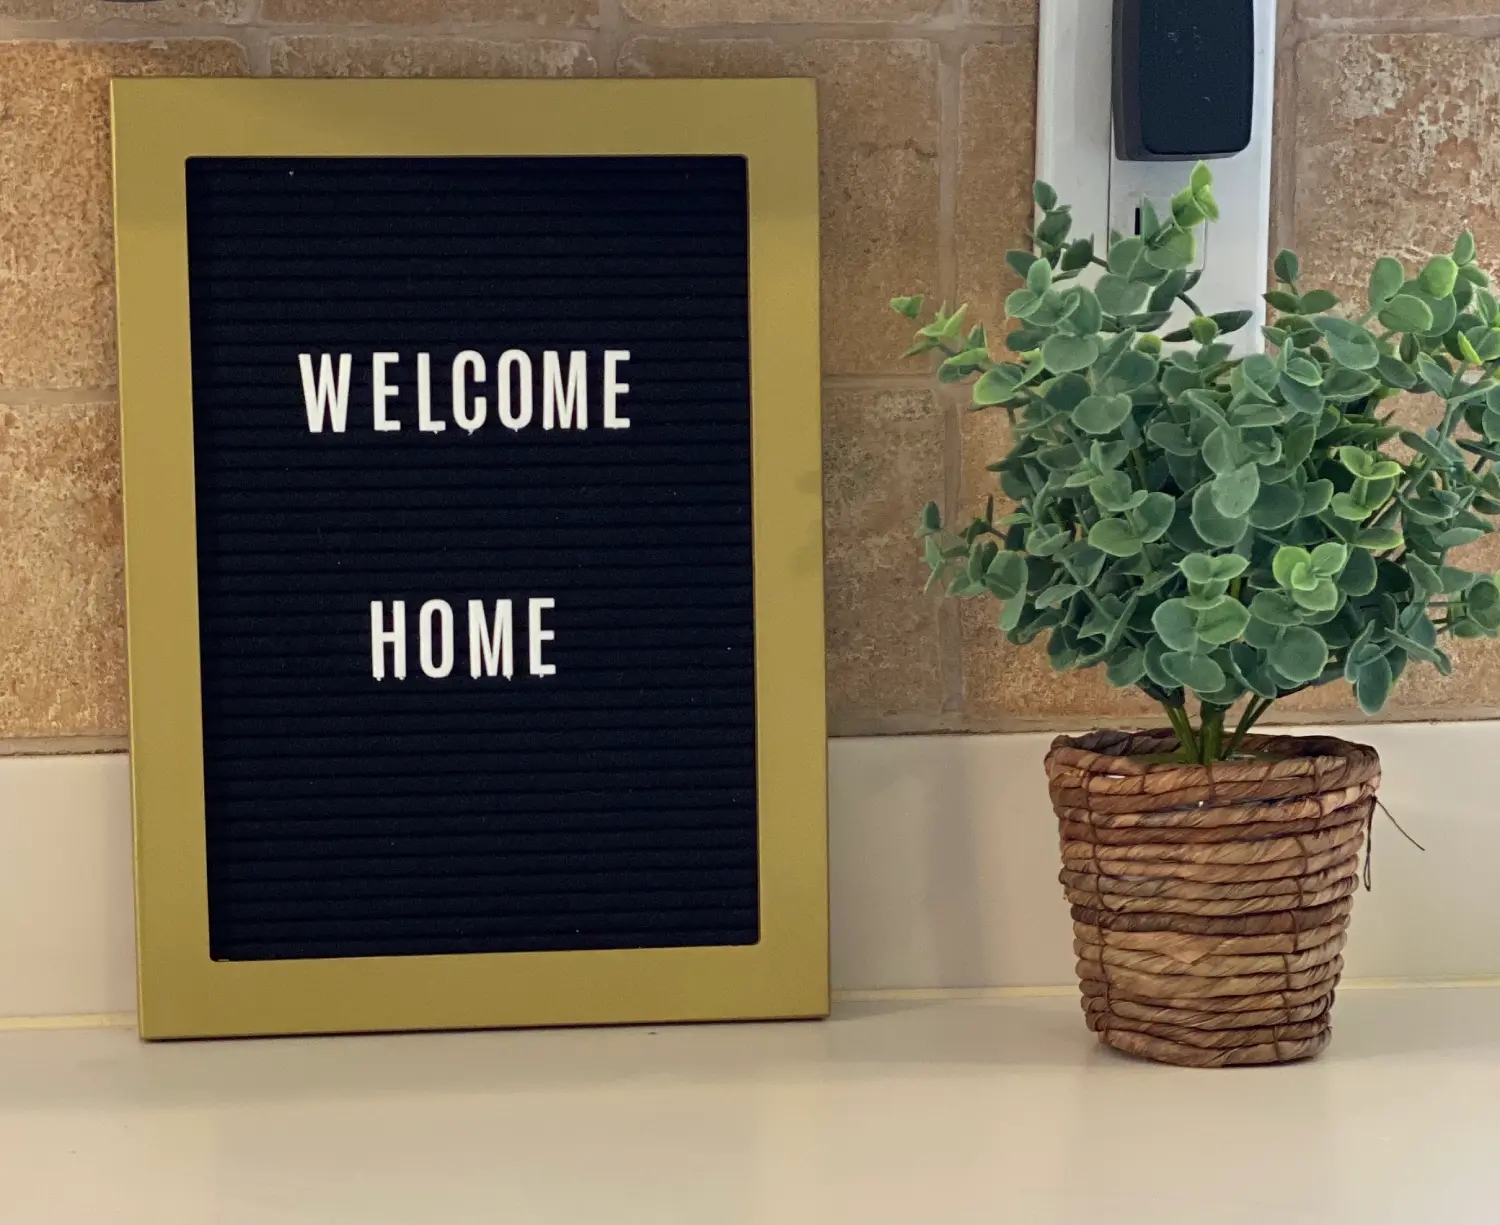 welcome home signage and plant